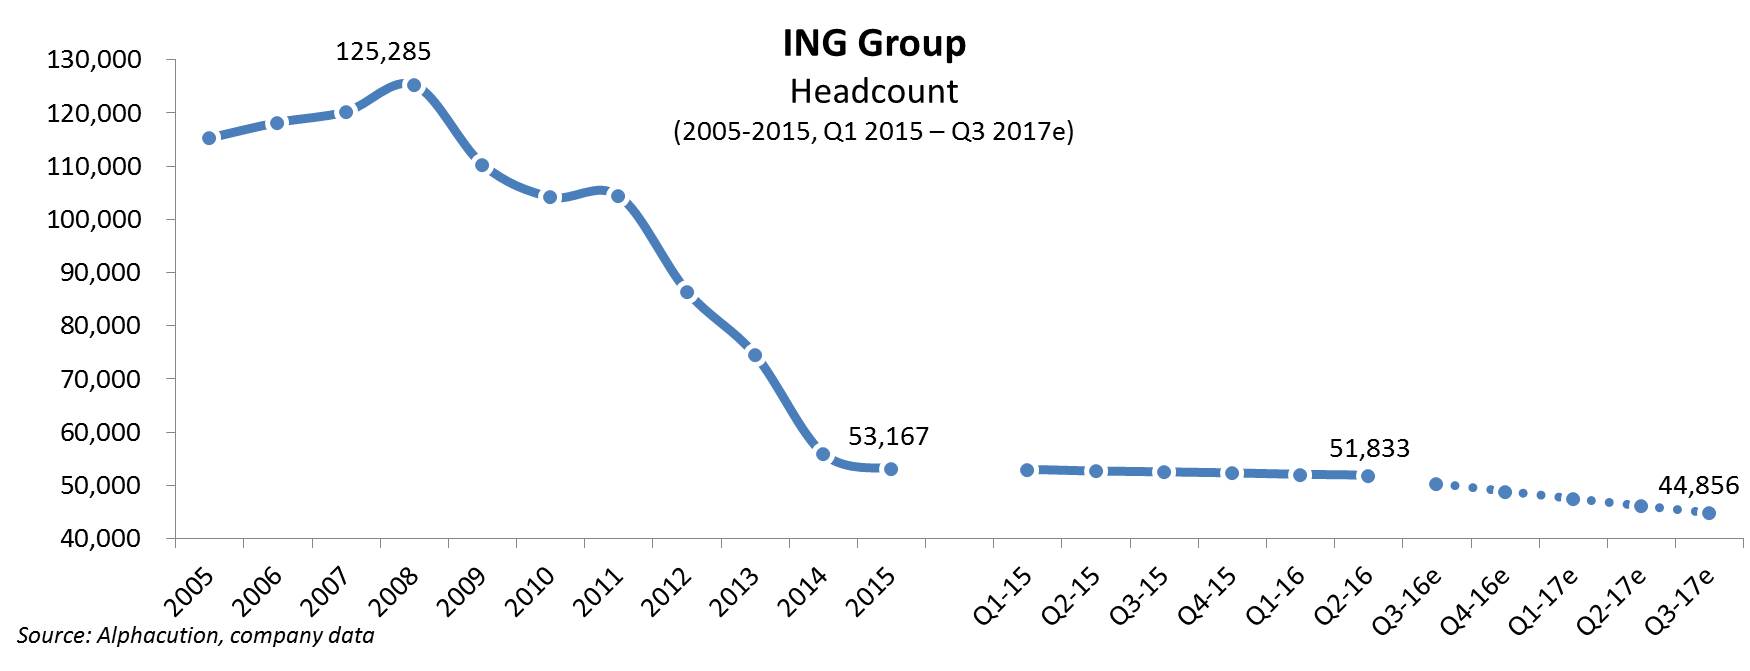 ing-group_headcount-historical-and-projections-20161003